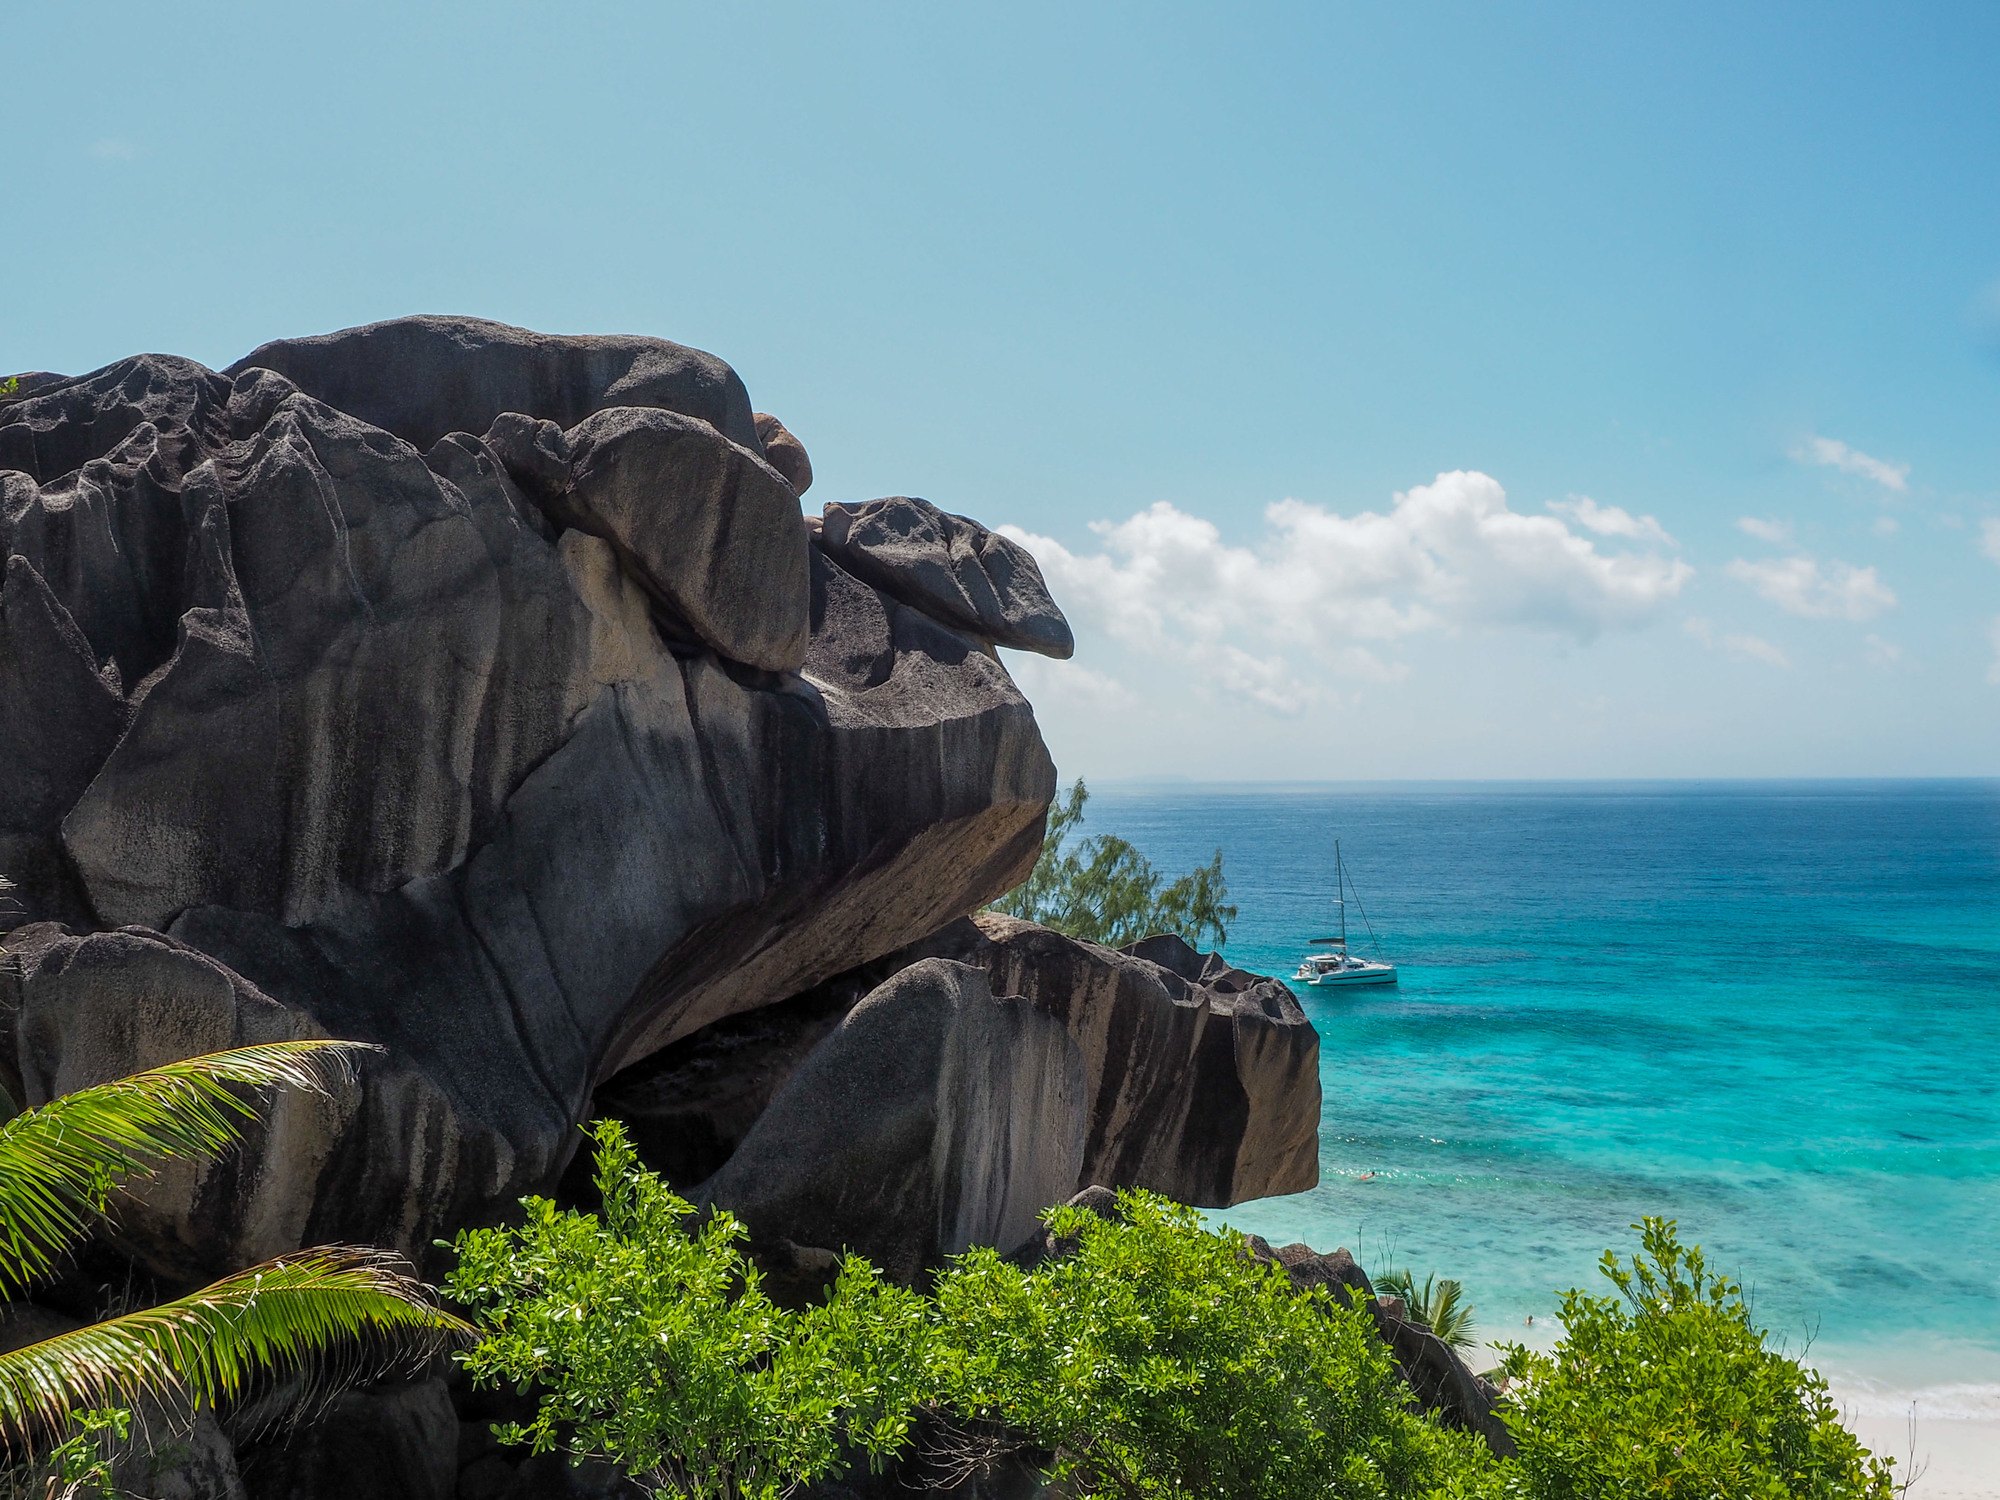 Grand Anse Beach on La Digue in the Seychelles